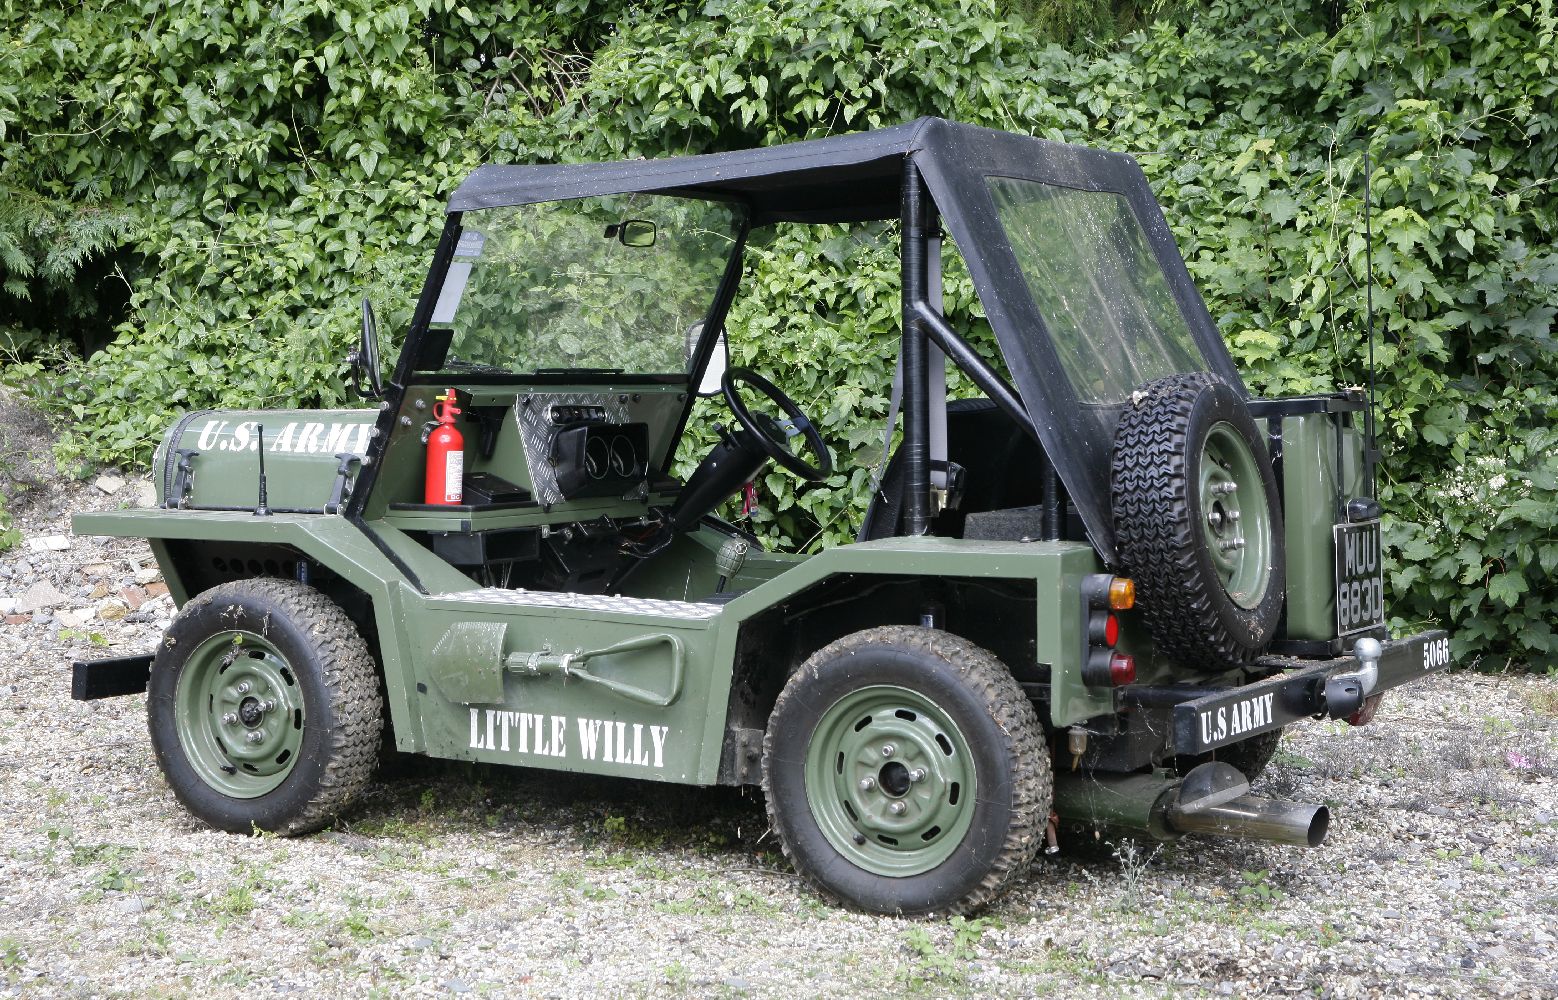 An Anderson kit car,originally registered as a 1966 Morris Mini convertible, with green army livery,